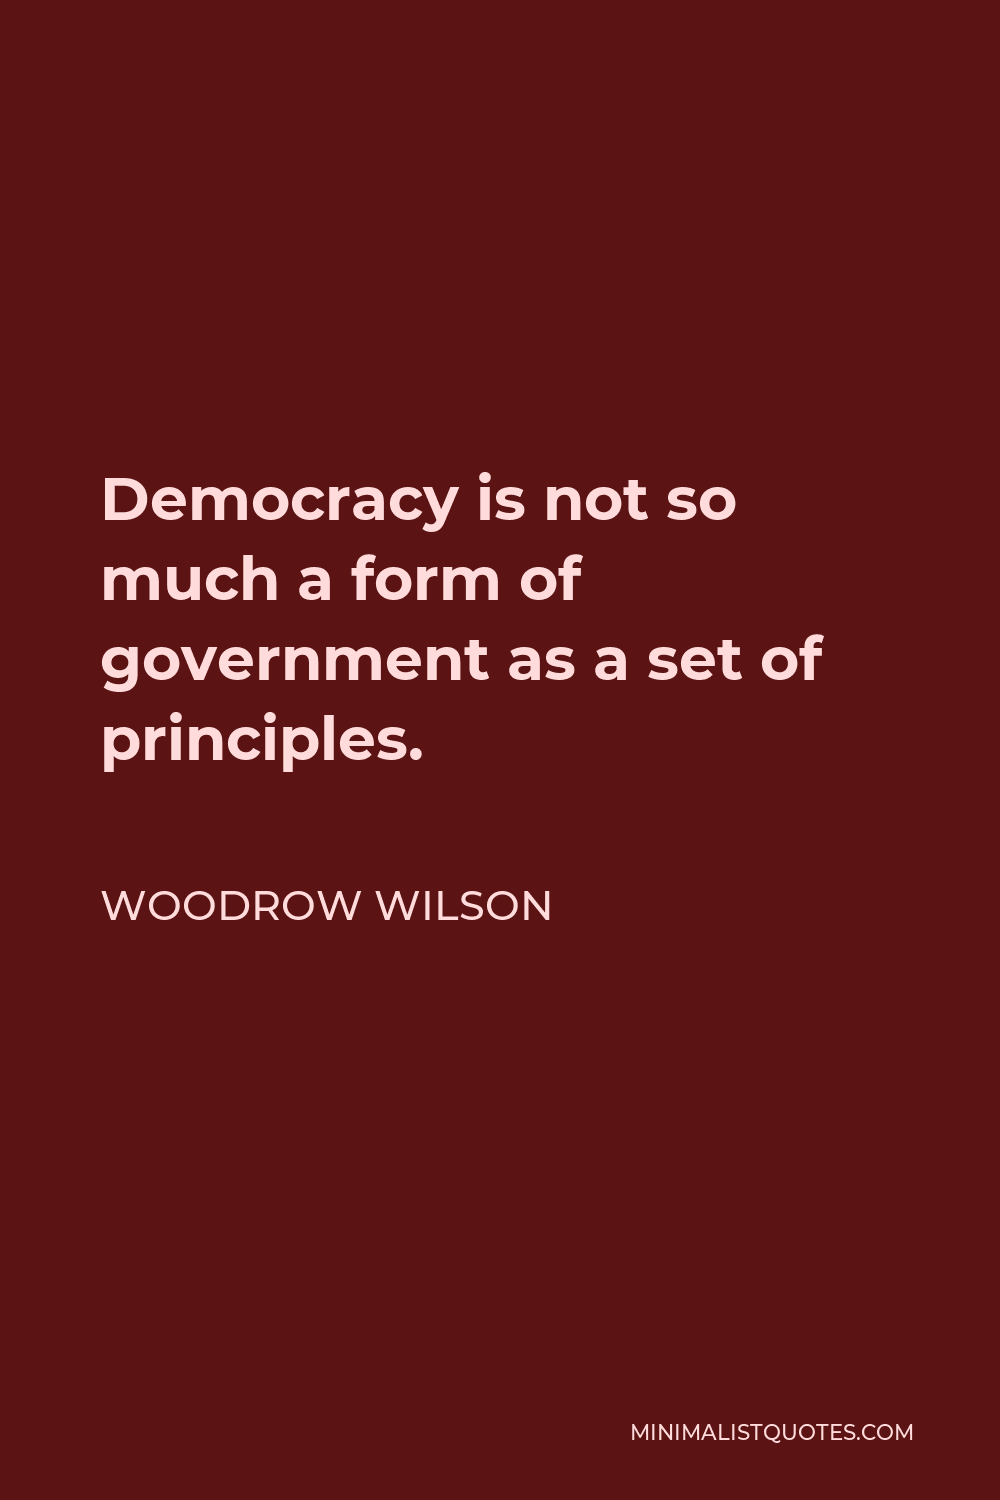 Woodrow Wilson Quote - Democracy is not so much a form of government as a set of principles.